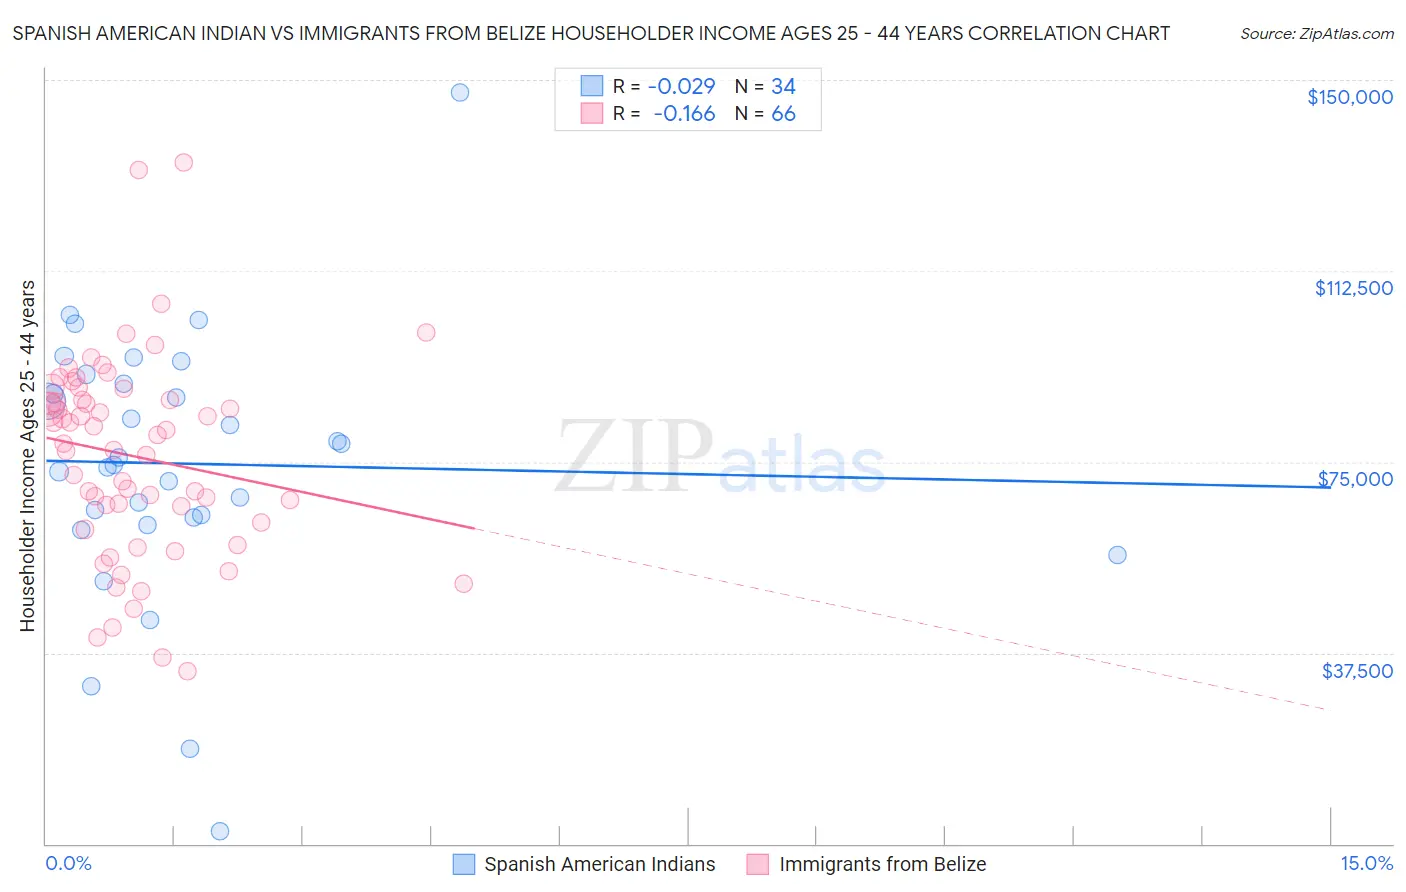 Spanish American Indian vs Immigrants from Belize Householder Income Ages 25 - 44 years